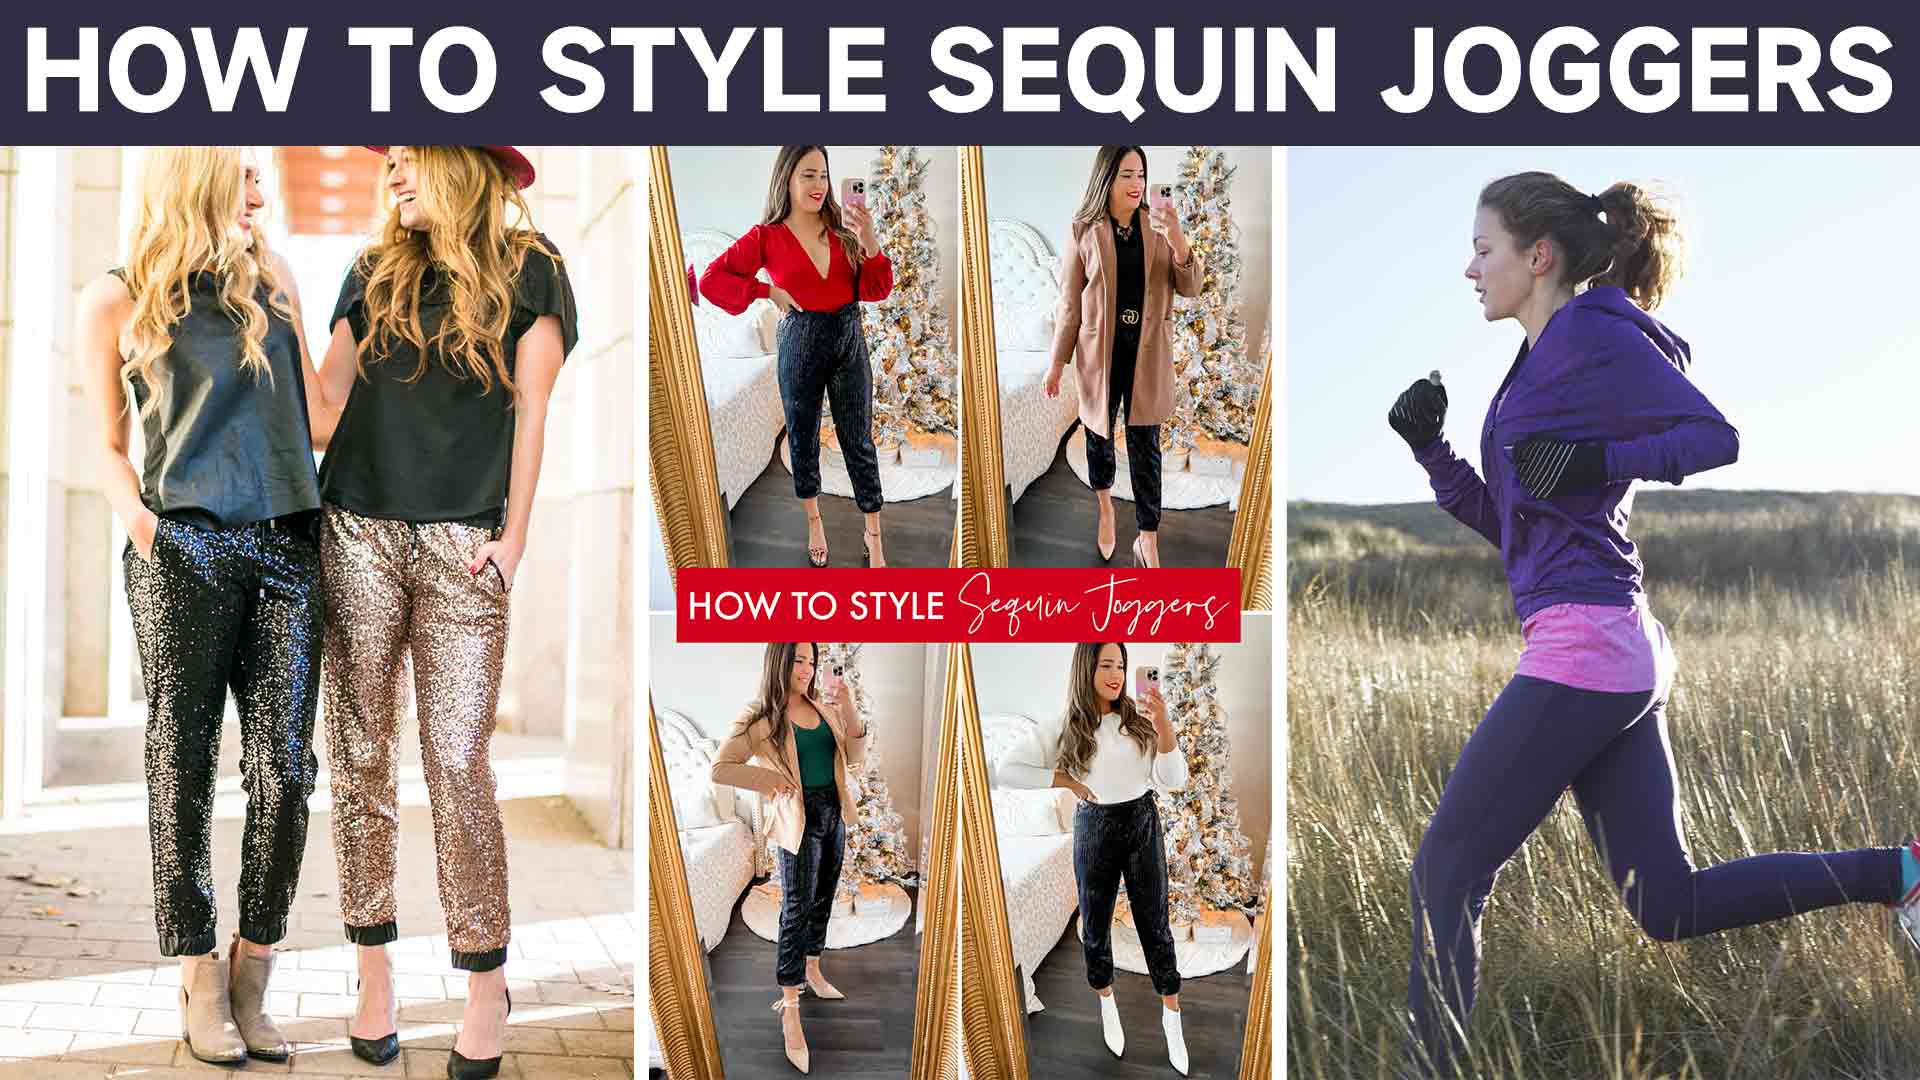 HOW TO STYLE SEQUIN JOGGERS